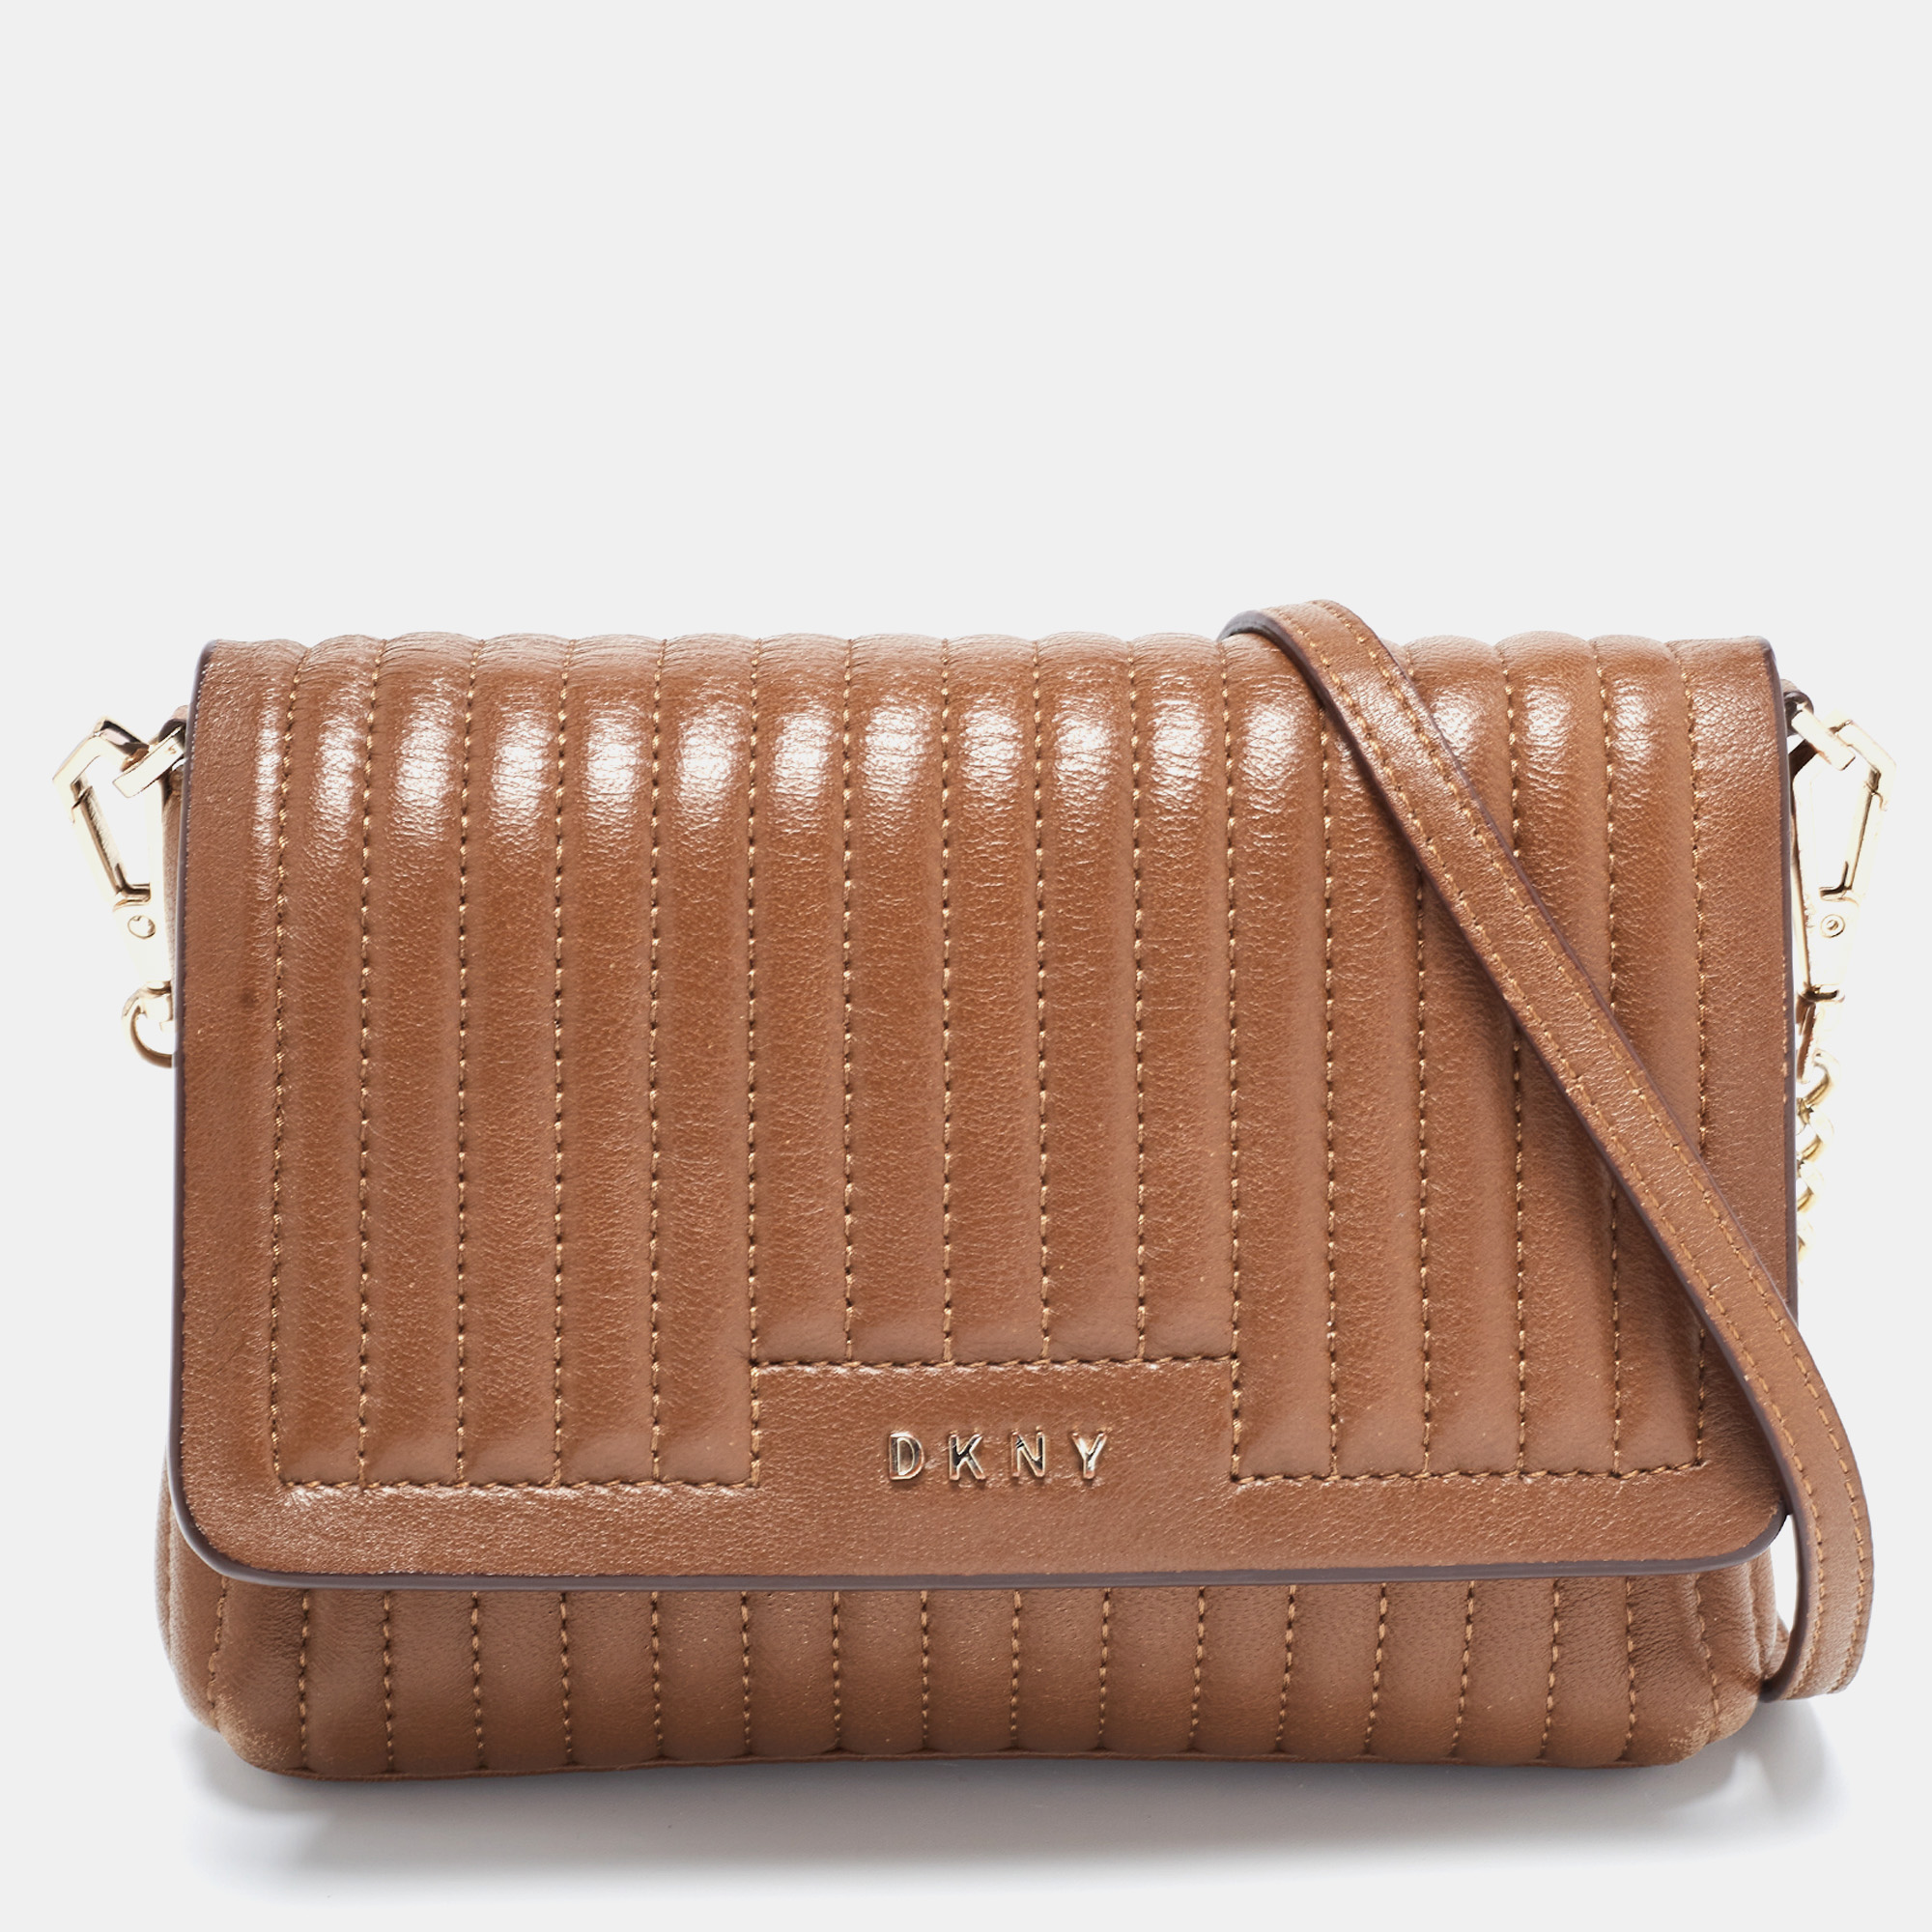 This Gansevoort flap bag from DKNY is perfect for everyday use. It is created using brown leather and has a long strap for crossbody wear.